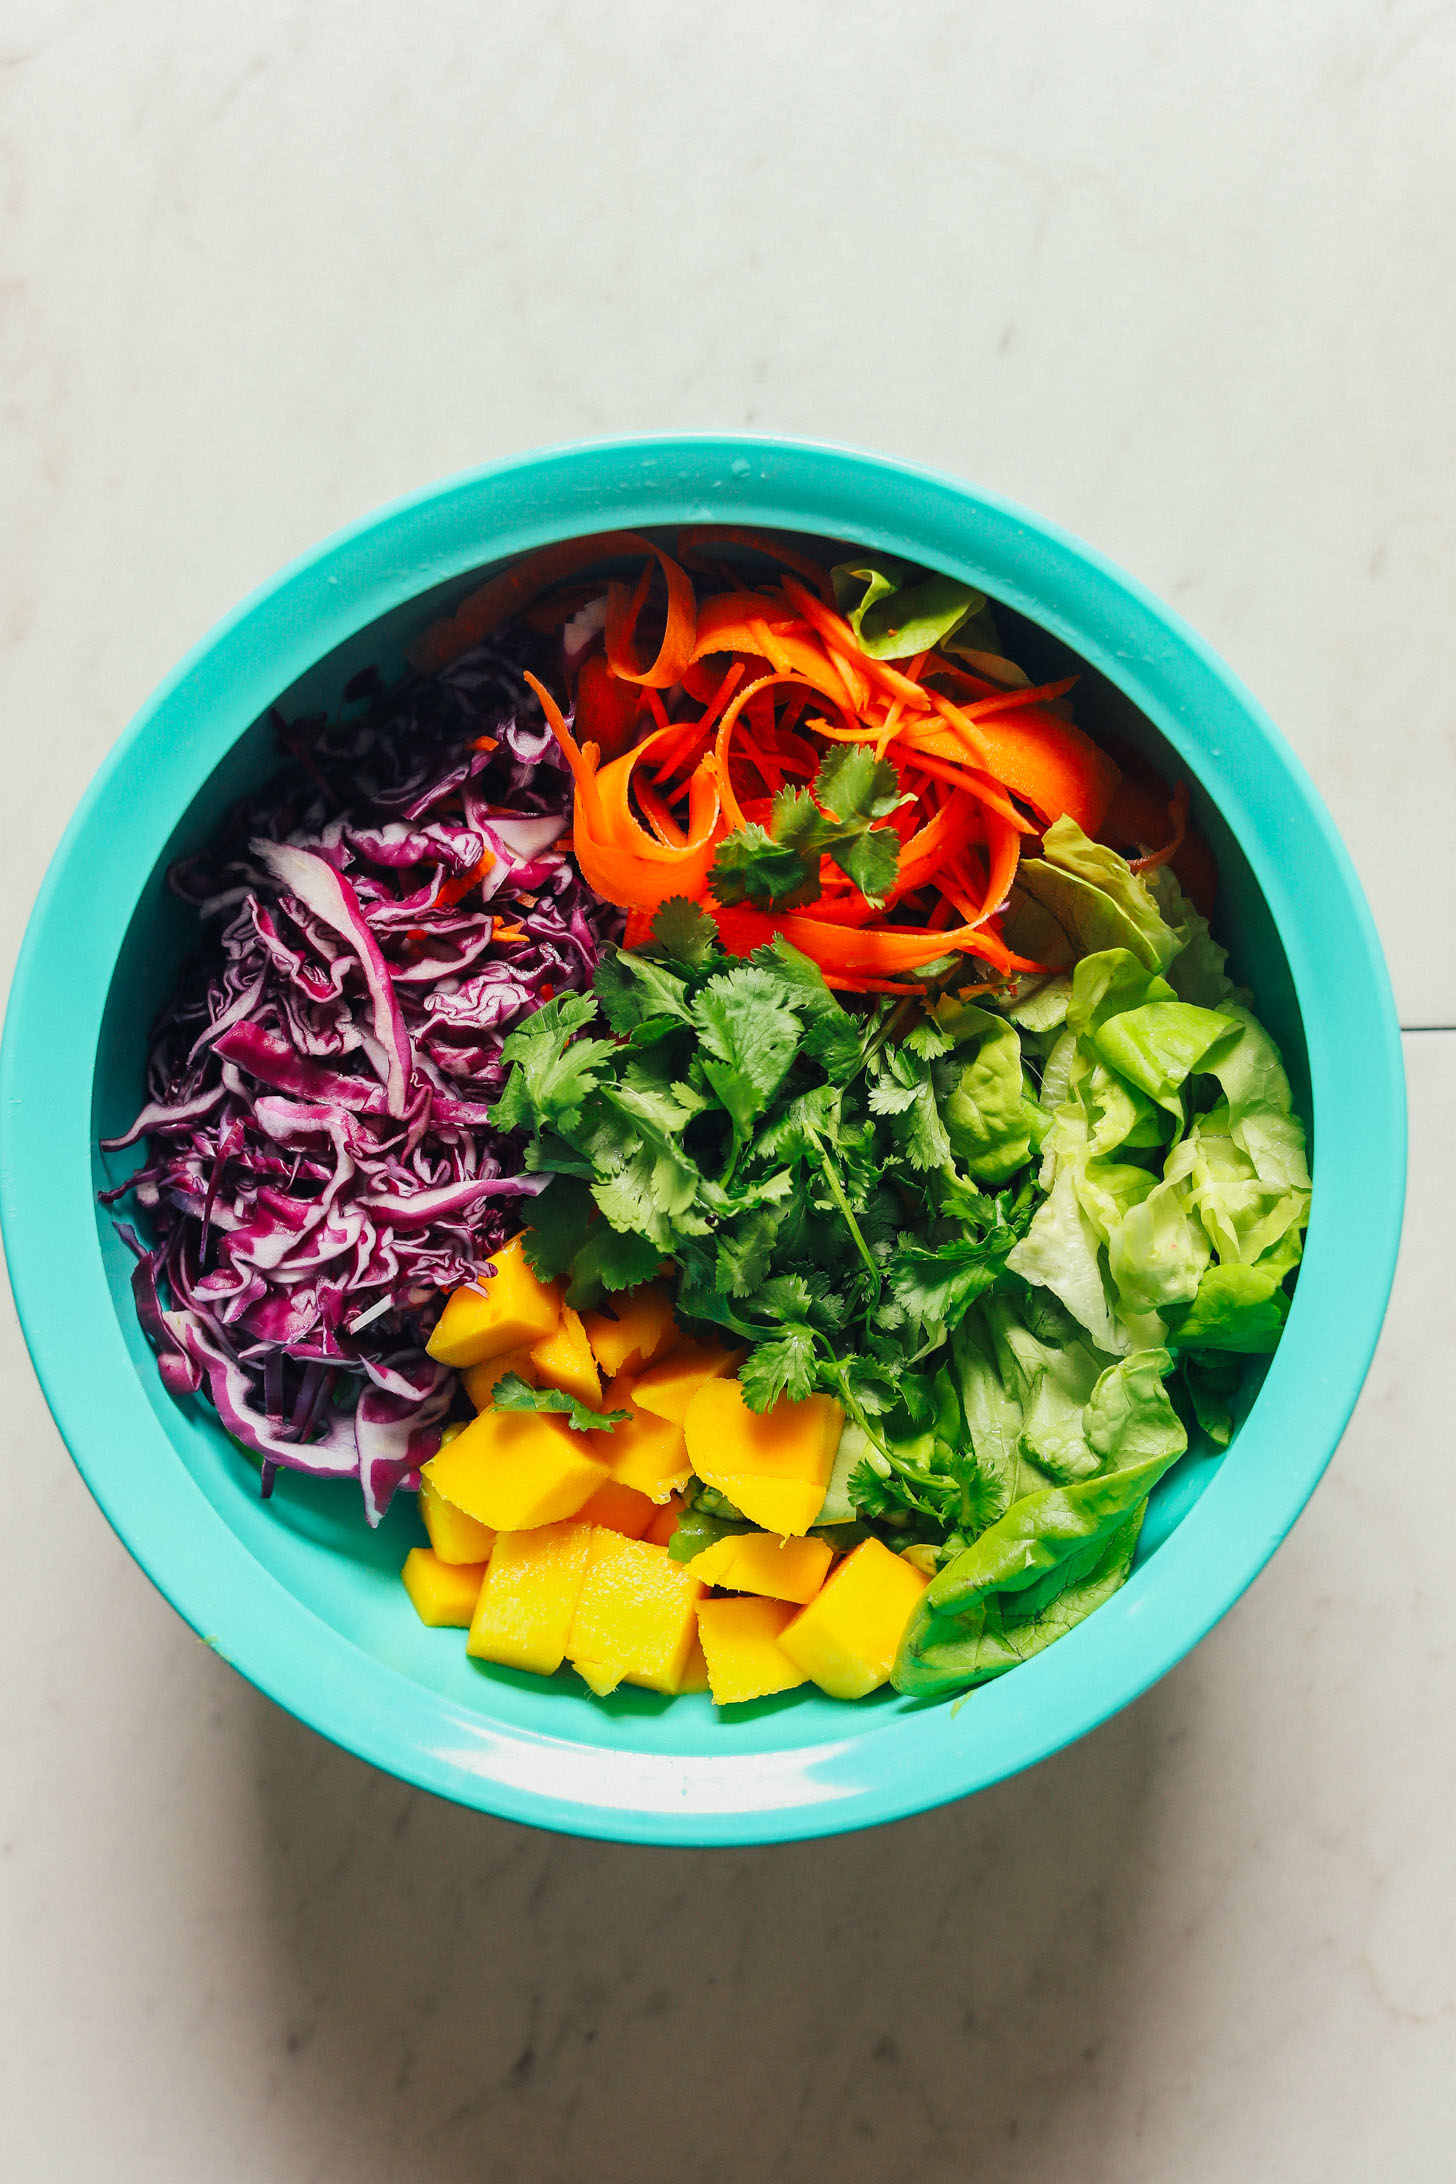 Bowl filled with cabbage, cilantro, mango, carrots, and lettuce for making a delicious gluten-free plant-based salad